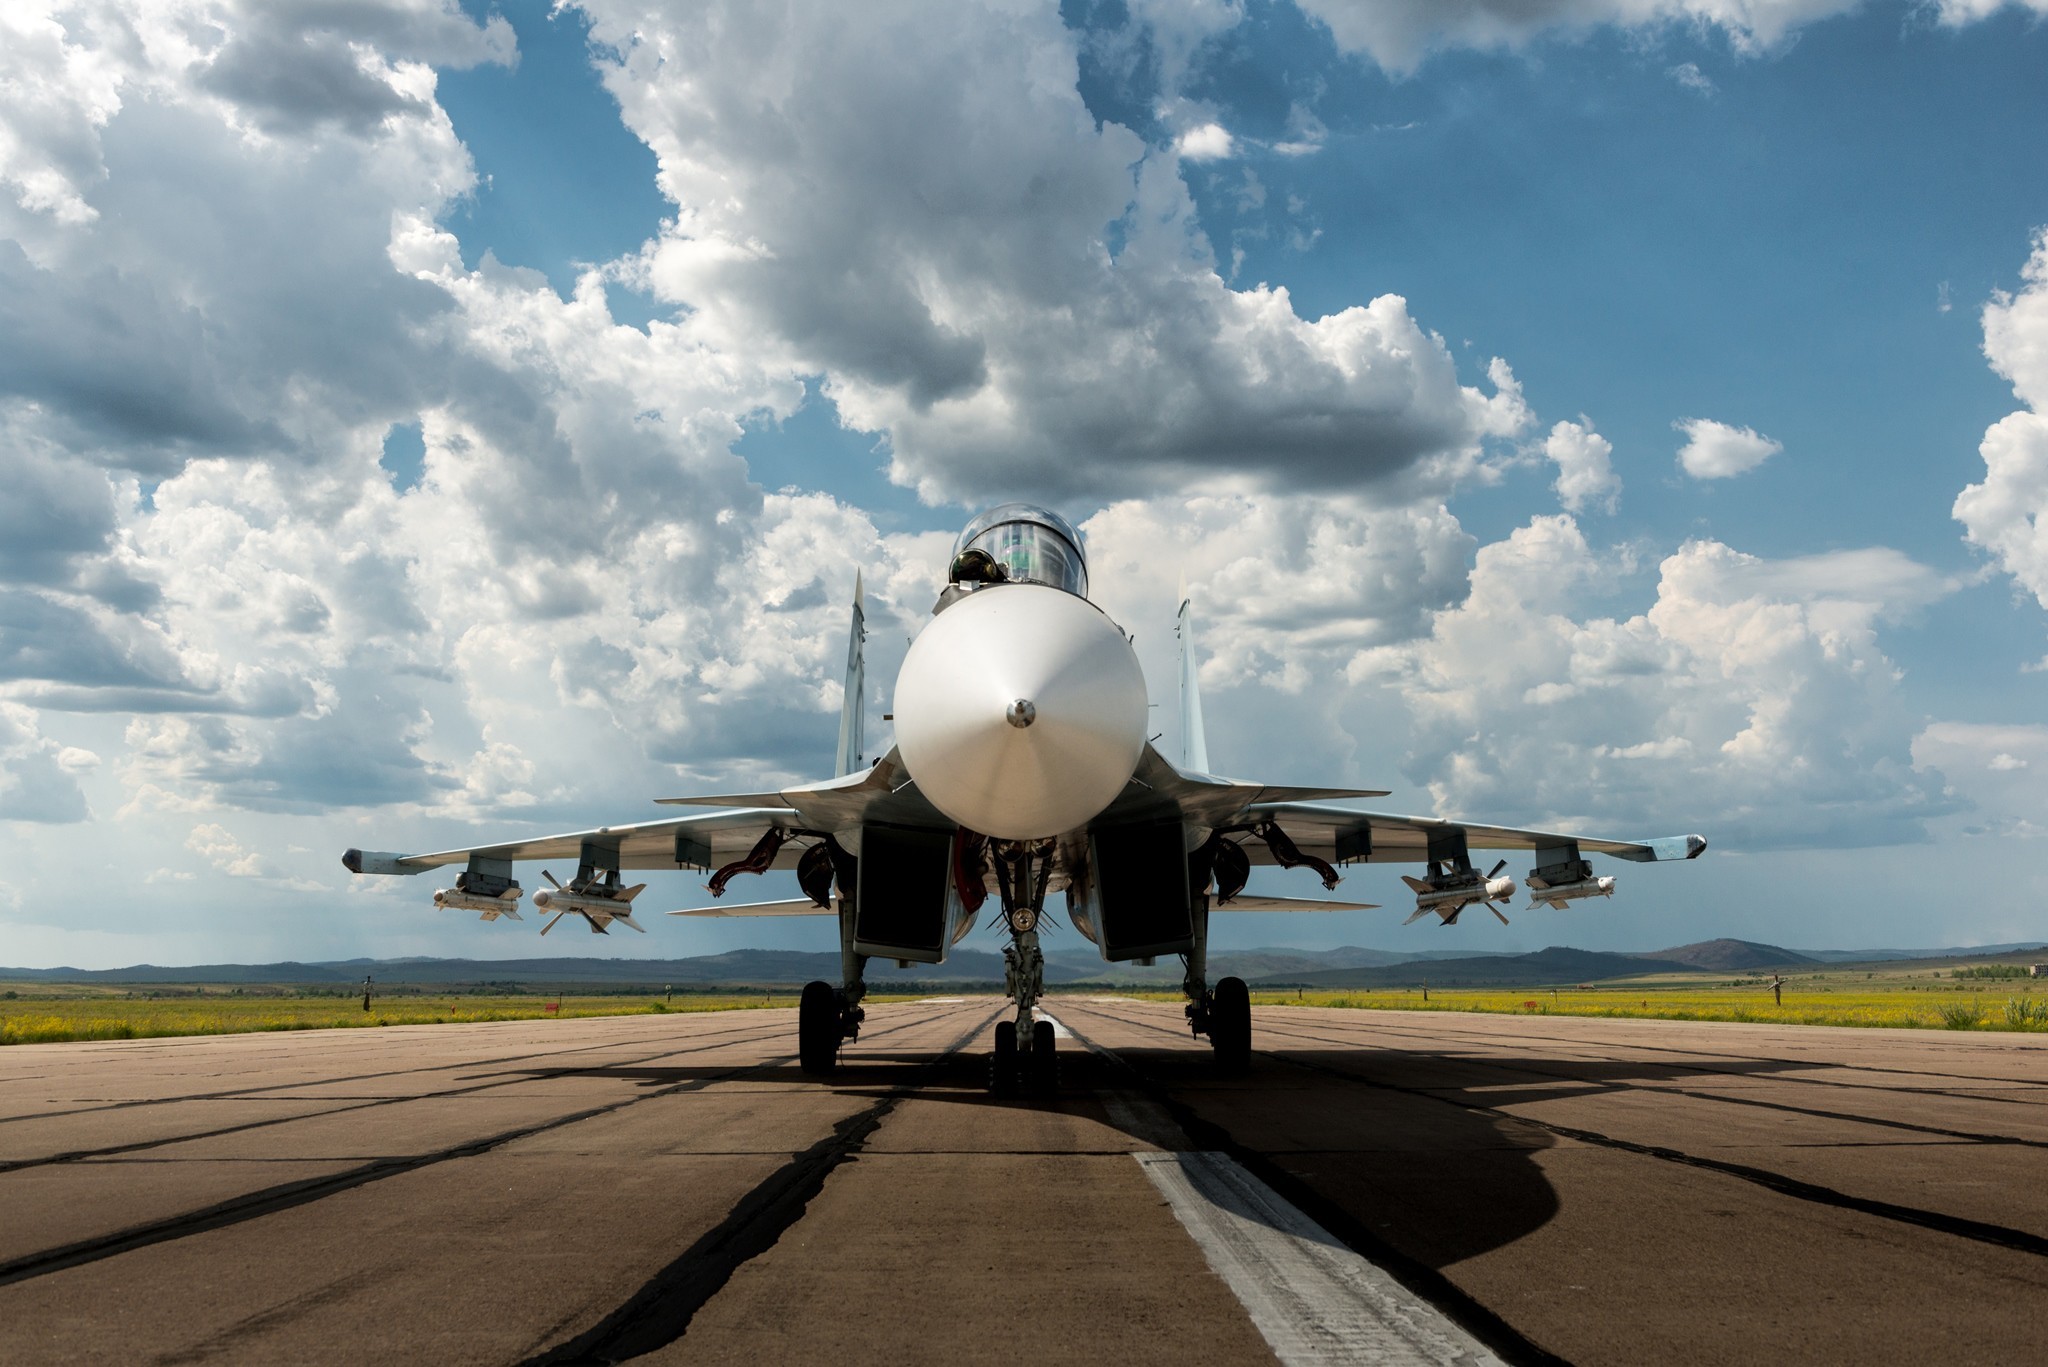 General 2048x1367 Sukhoi Su-30 aircraft clouds vehicle military military aircraft military vehicle frontal view jet fighter Sukhoi